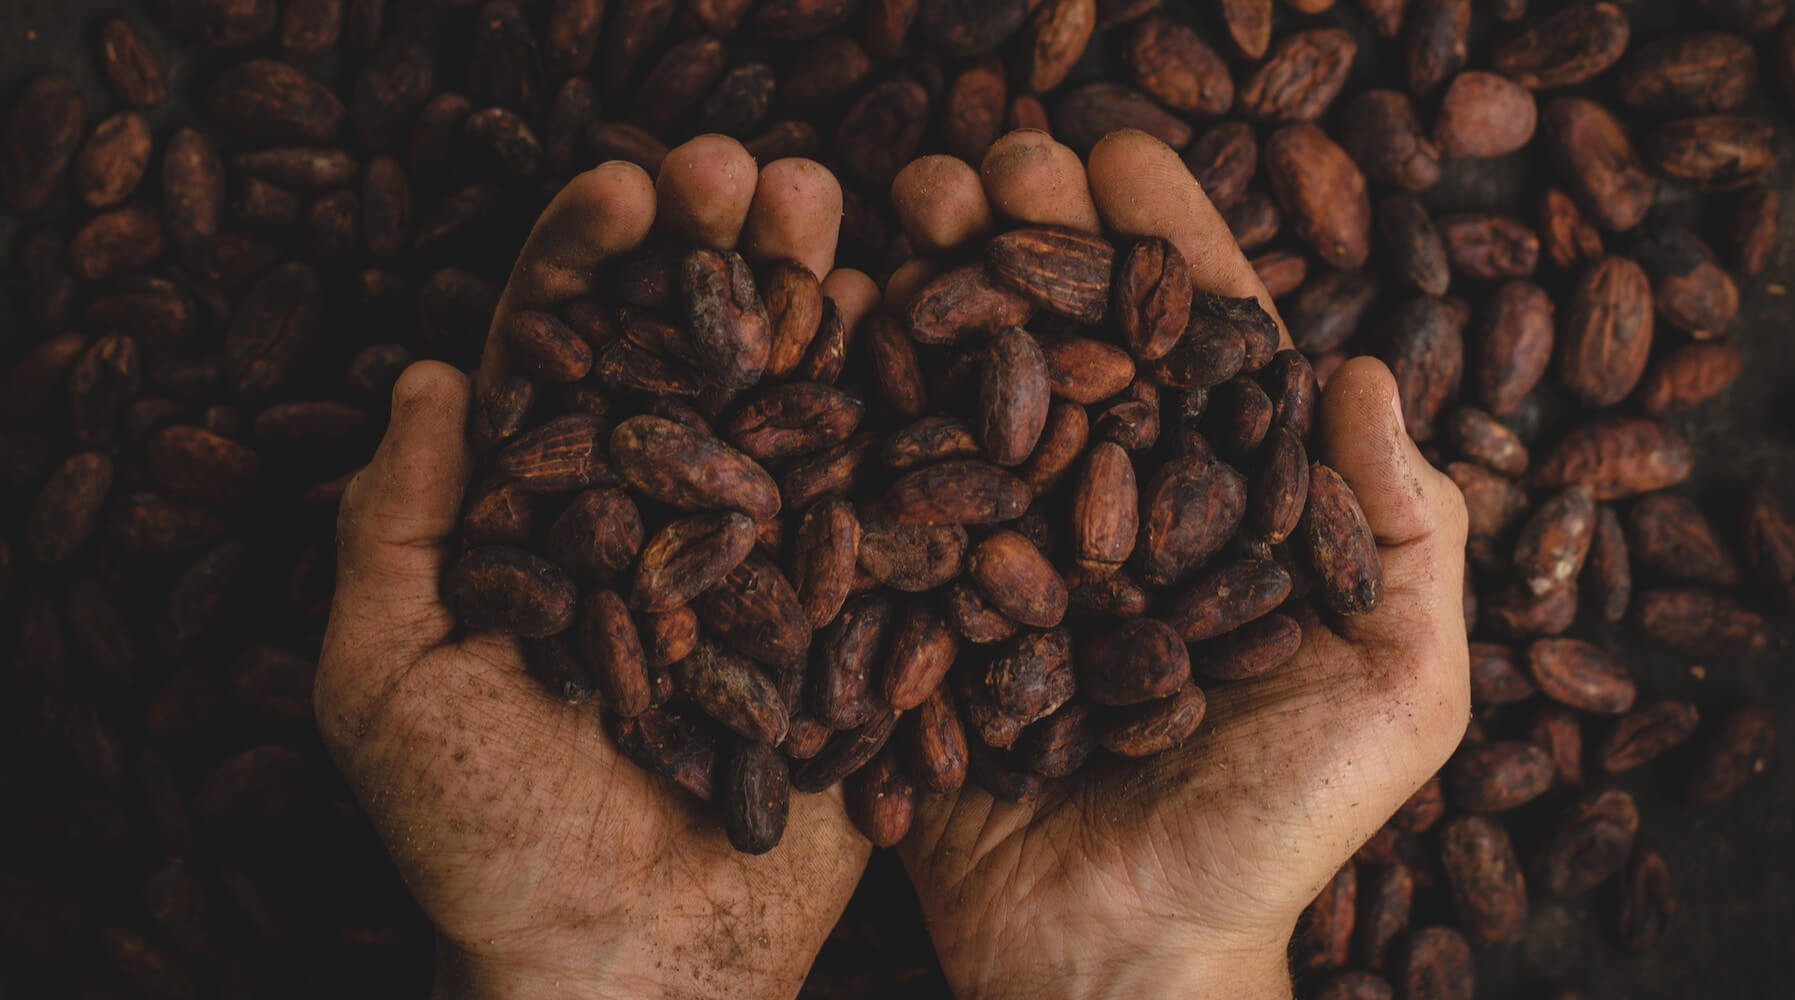 Hands holding cacao